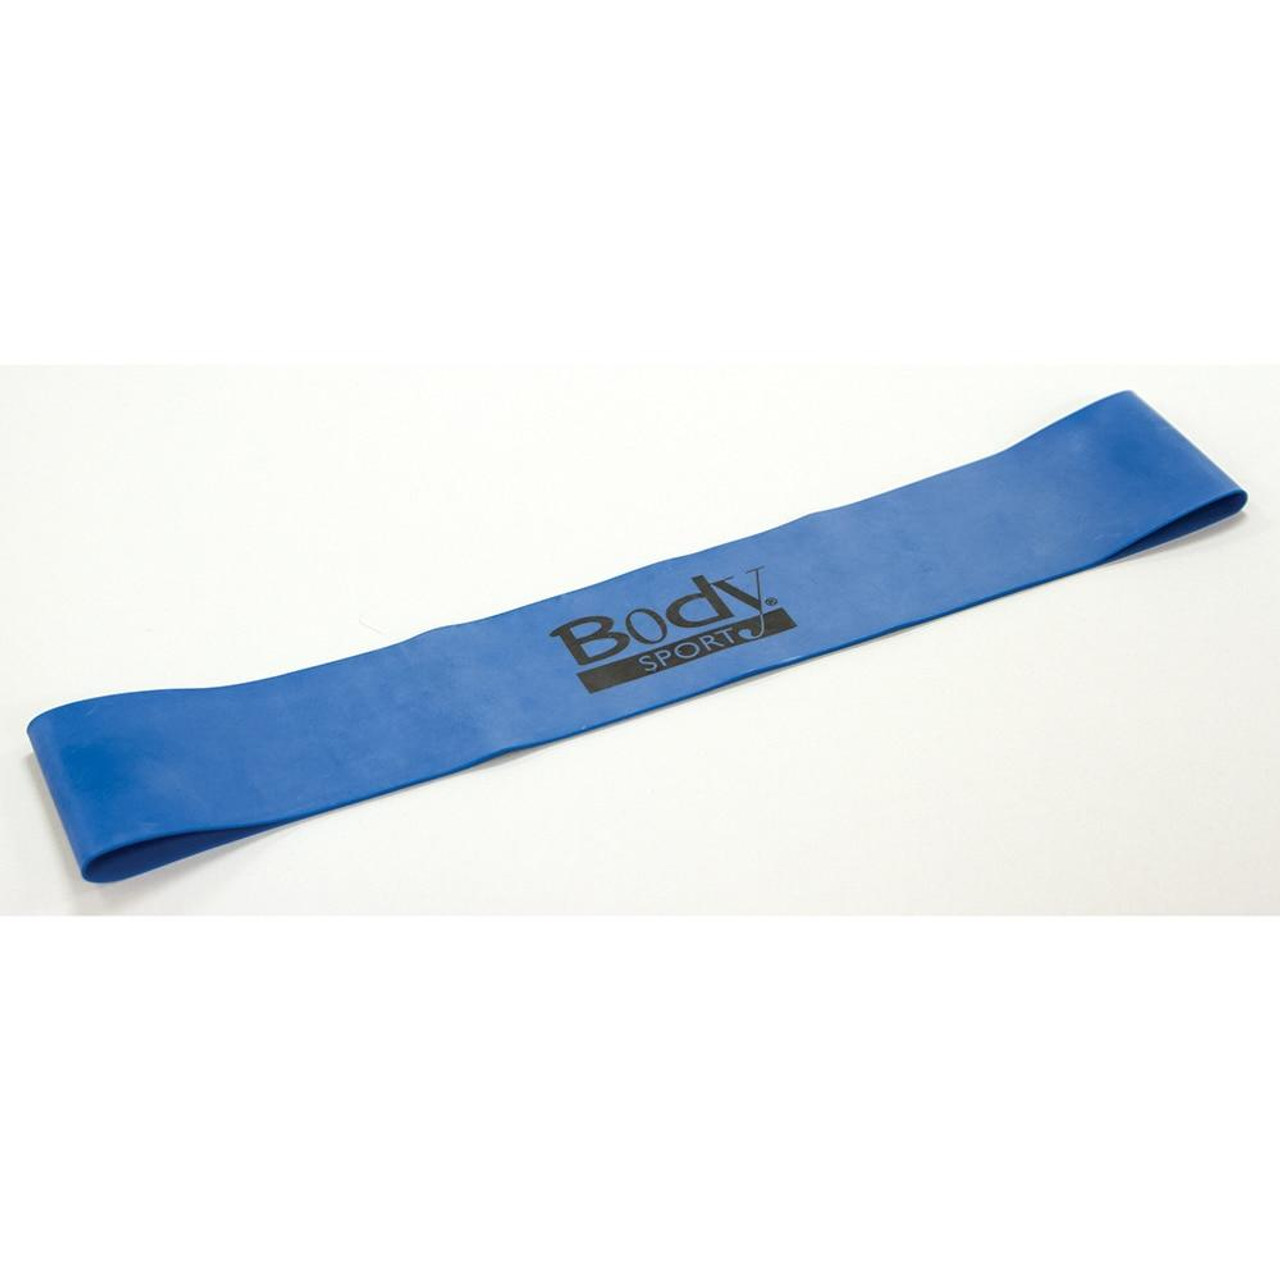 Body Sport Super Loop Band Extra Heavy (66 - 148 lbs) Green (41)  [BDSLB41GRN] - $99.99 : PT United, Add Physical Therapy Products To Your  Practice